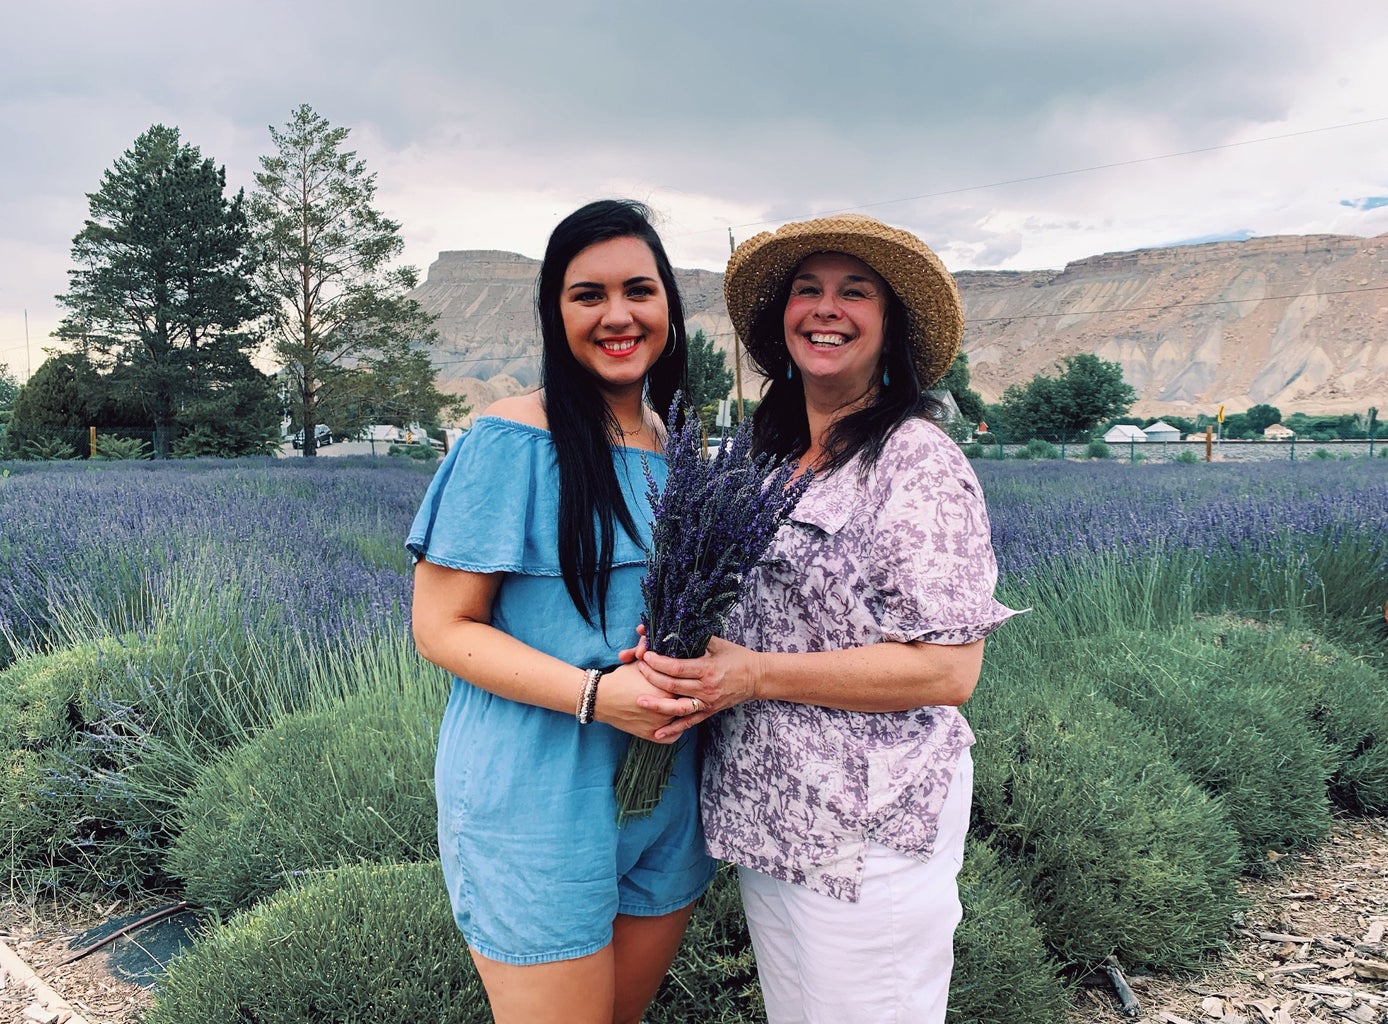 My mother and I at the lavender festival in Palisade, Colorado.